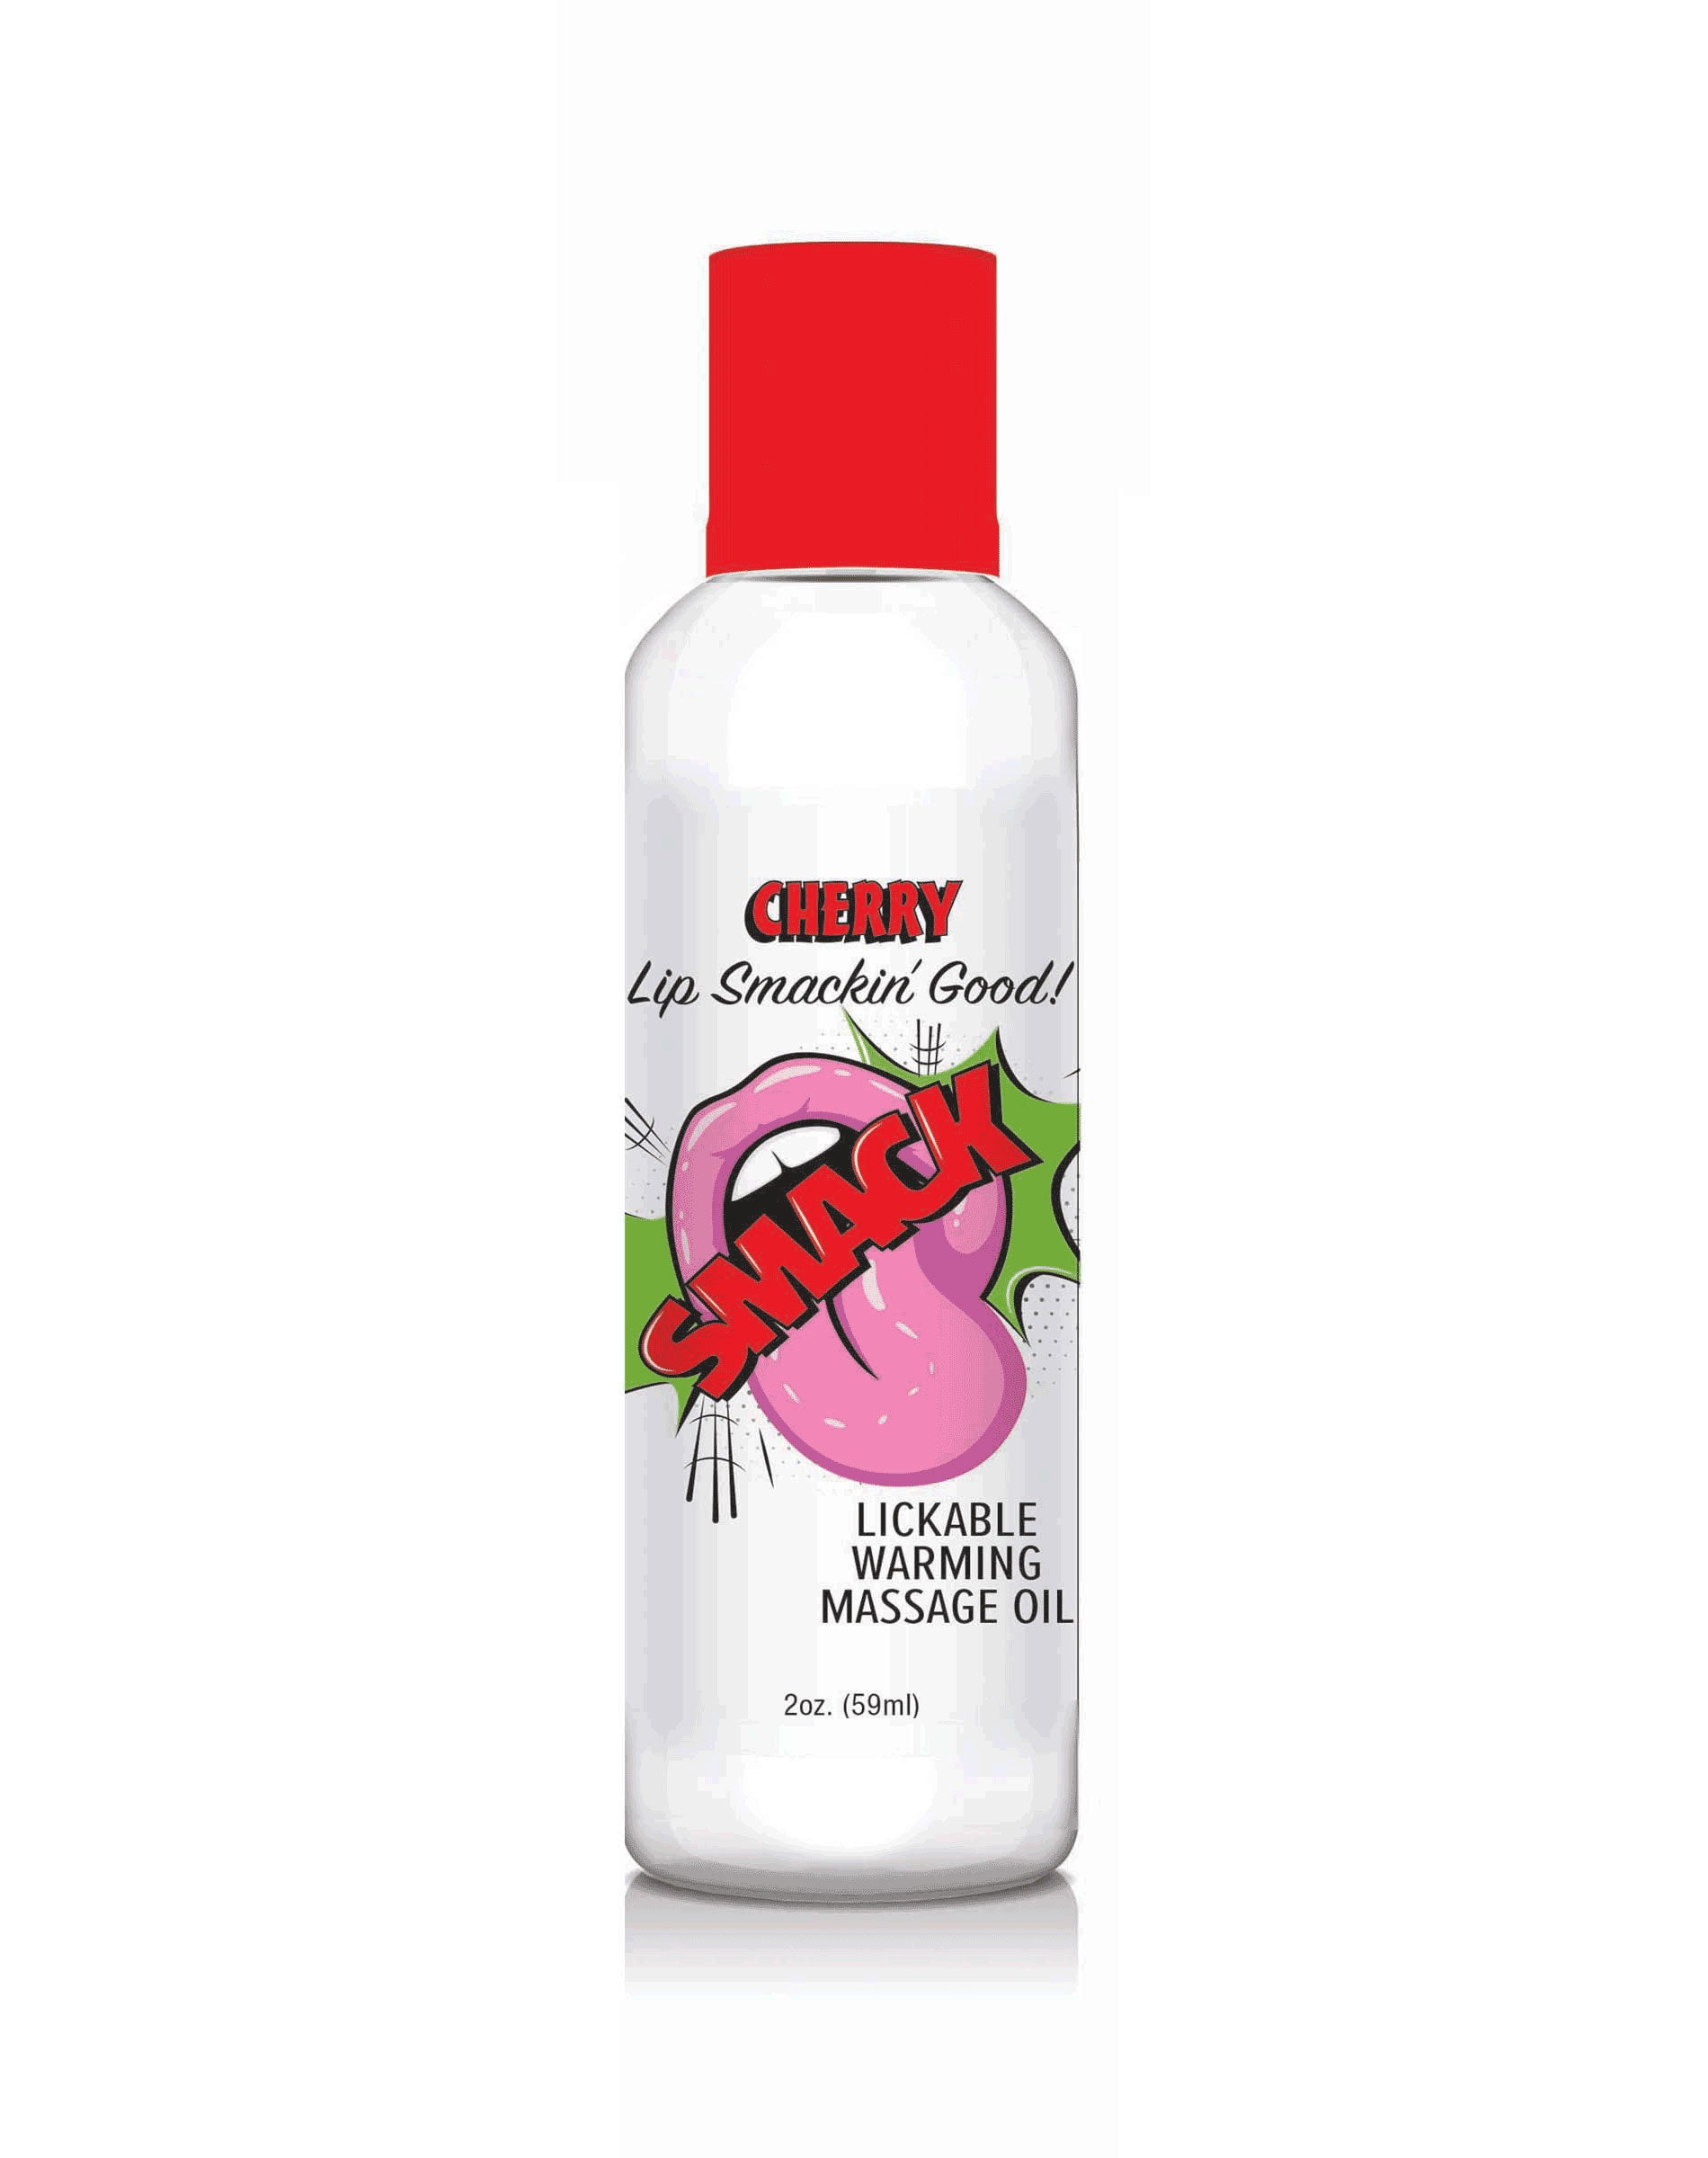 Smack Warming and Lickable Massage Oil - Cherry 2  Oz-1